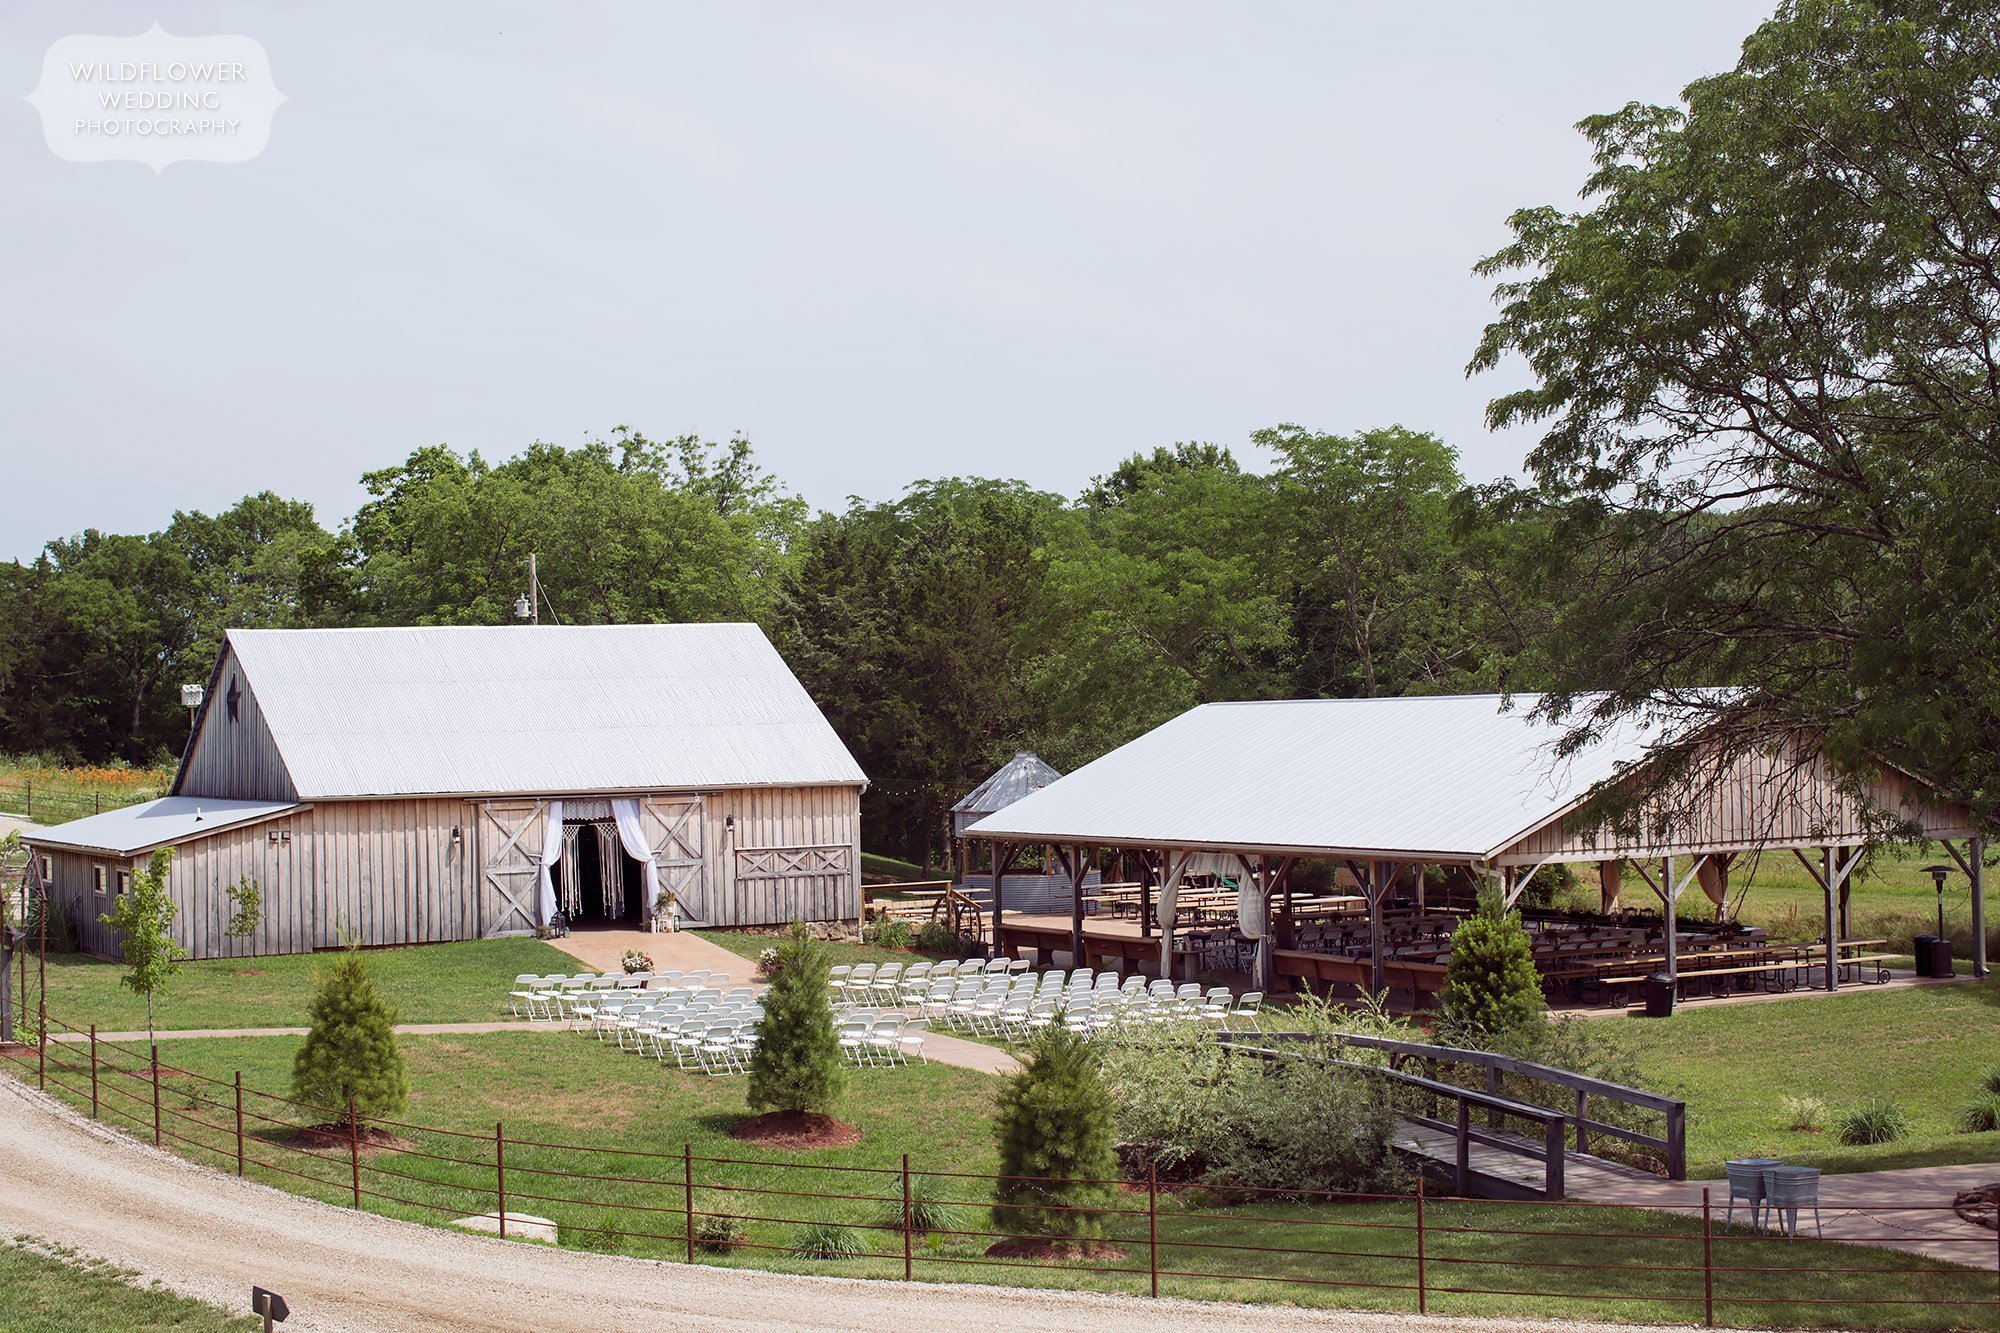 This country wedding venue at the Kempker's Back 40 barn in Westphalia is beautiful.